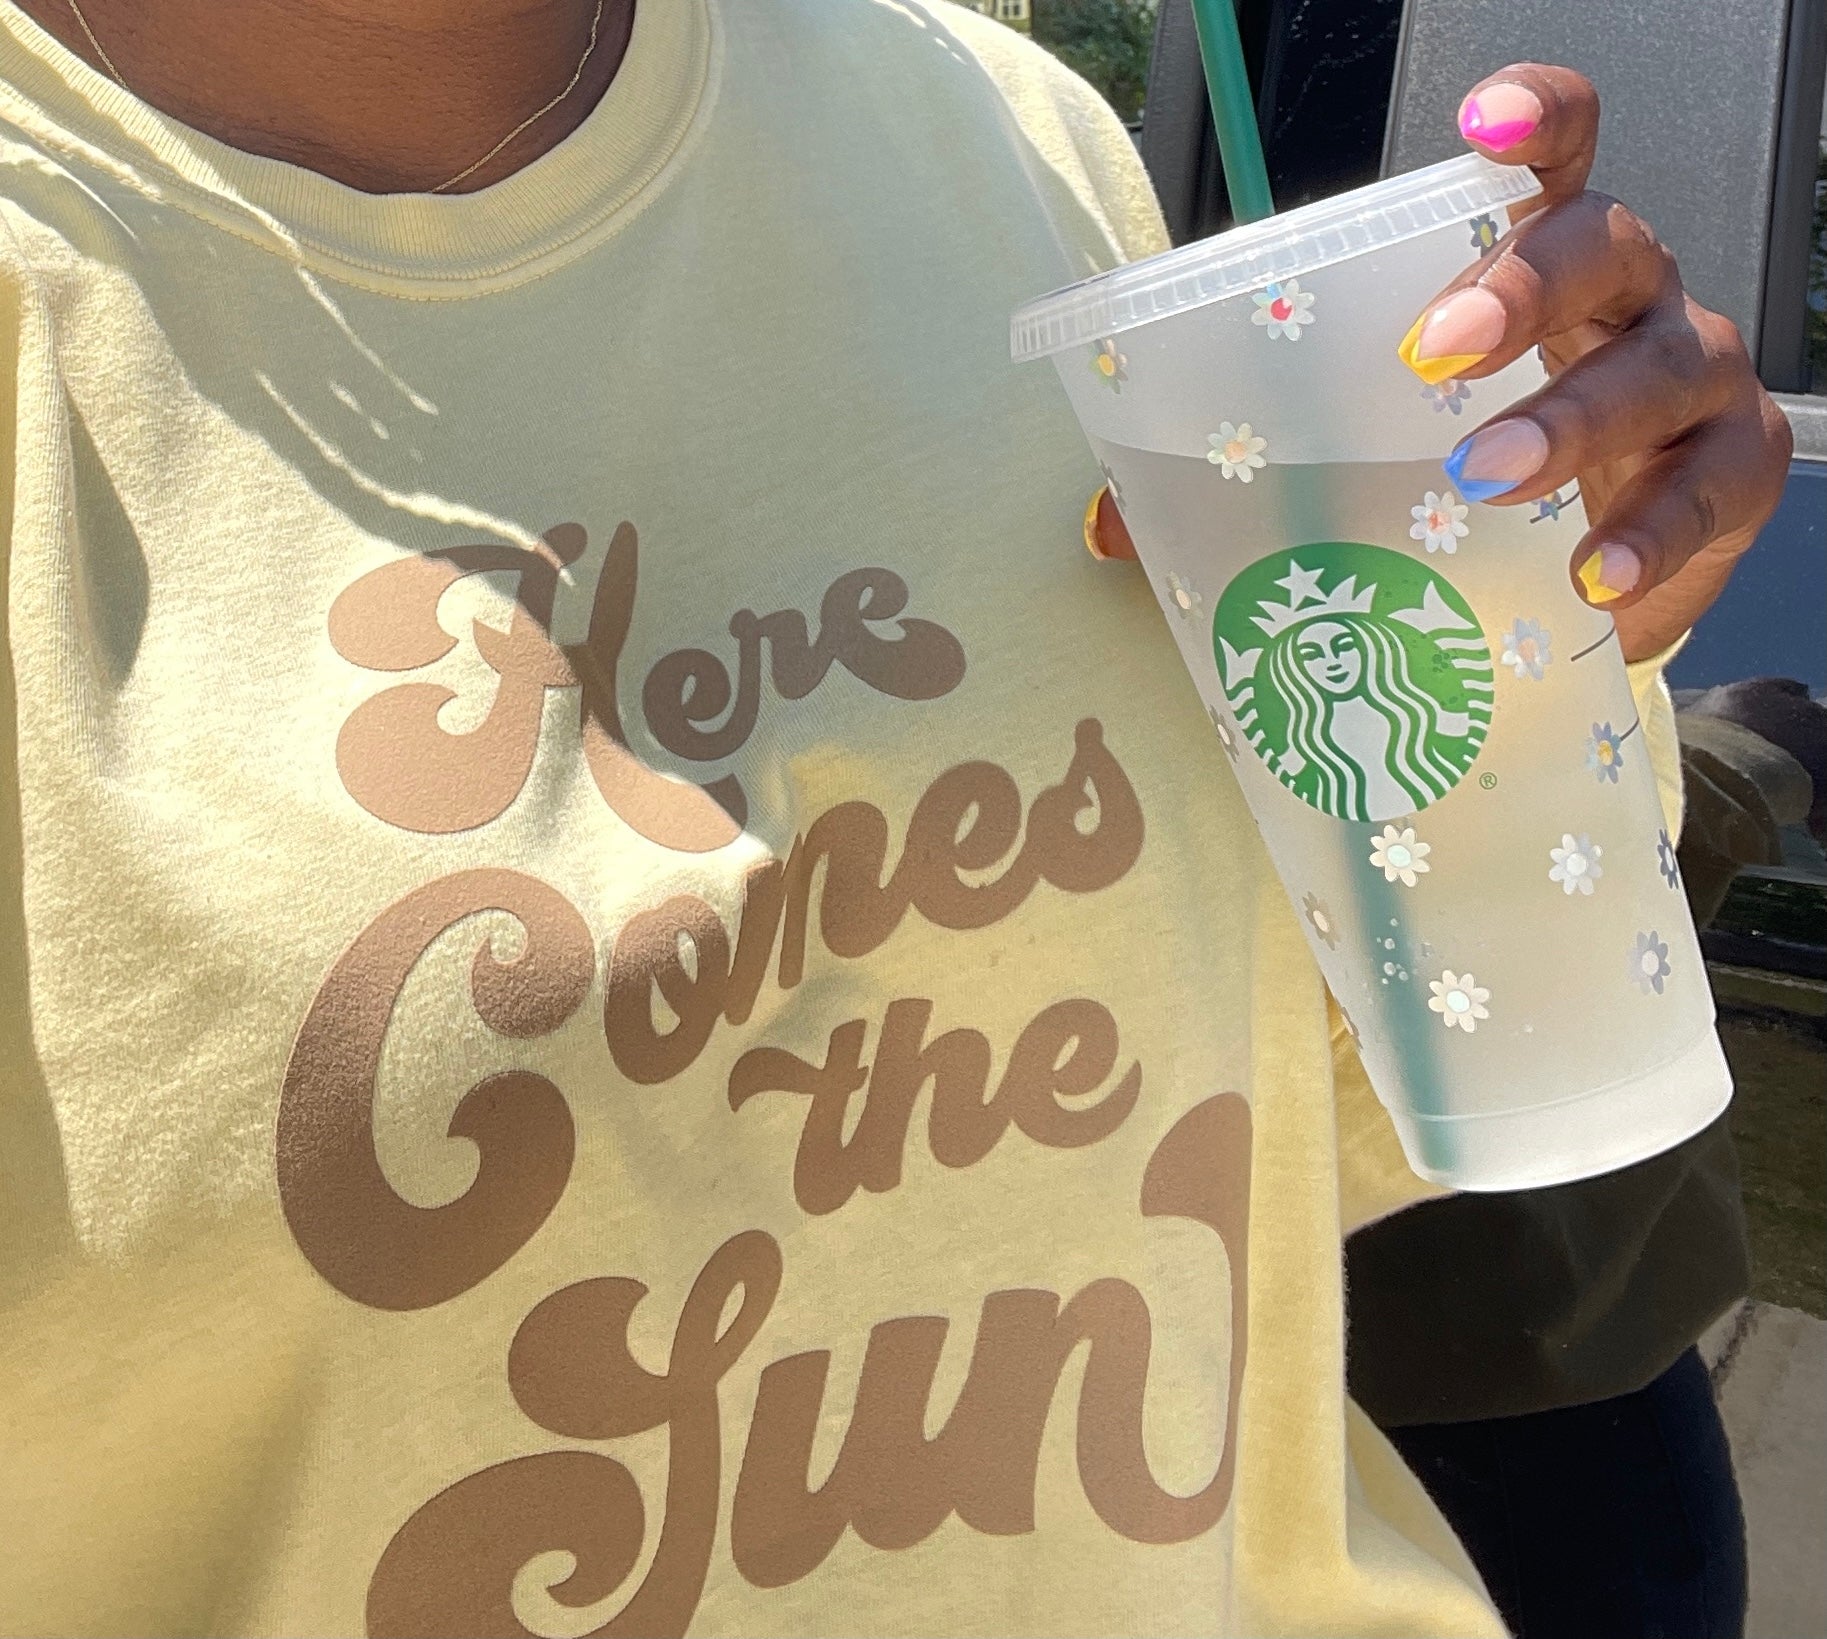 Sage Green Retro Daisy Starbucks Cup Personalized Starbucks Cold Cup  Birthday Gift Reusable Cup Iced Coffee Cup Starbucks Tumbler 